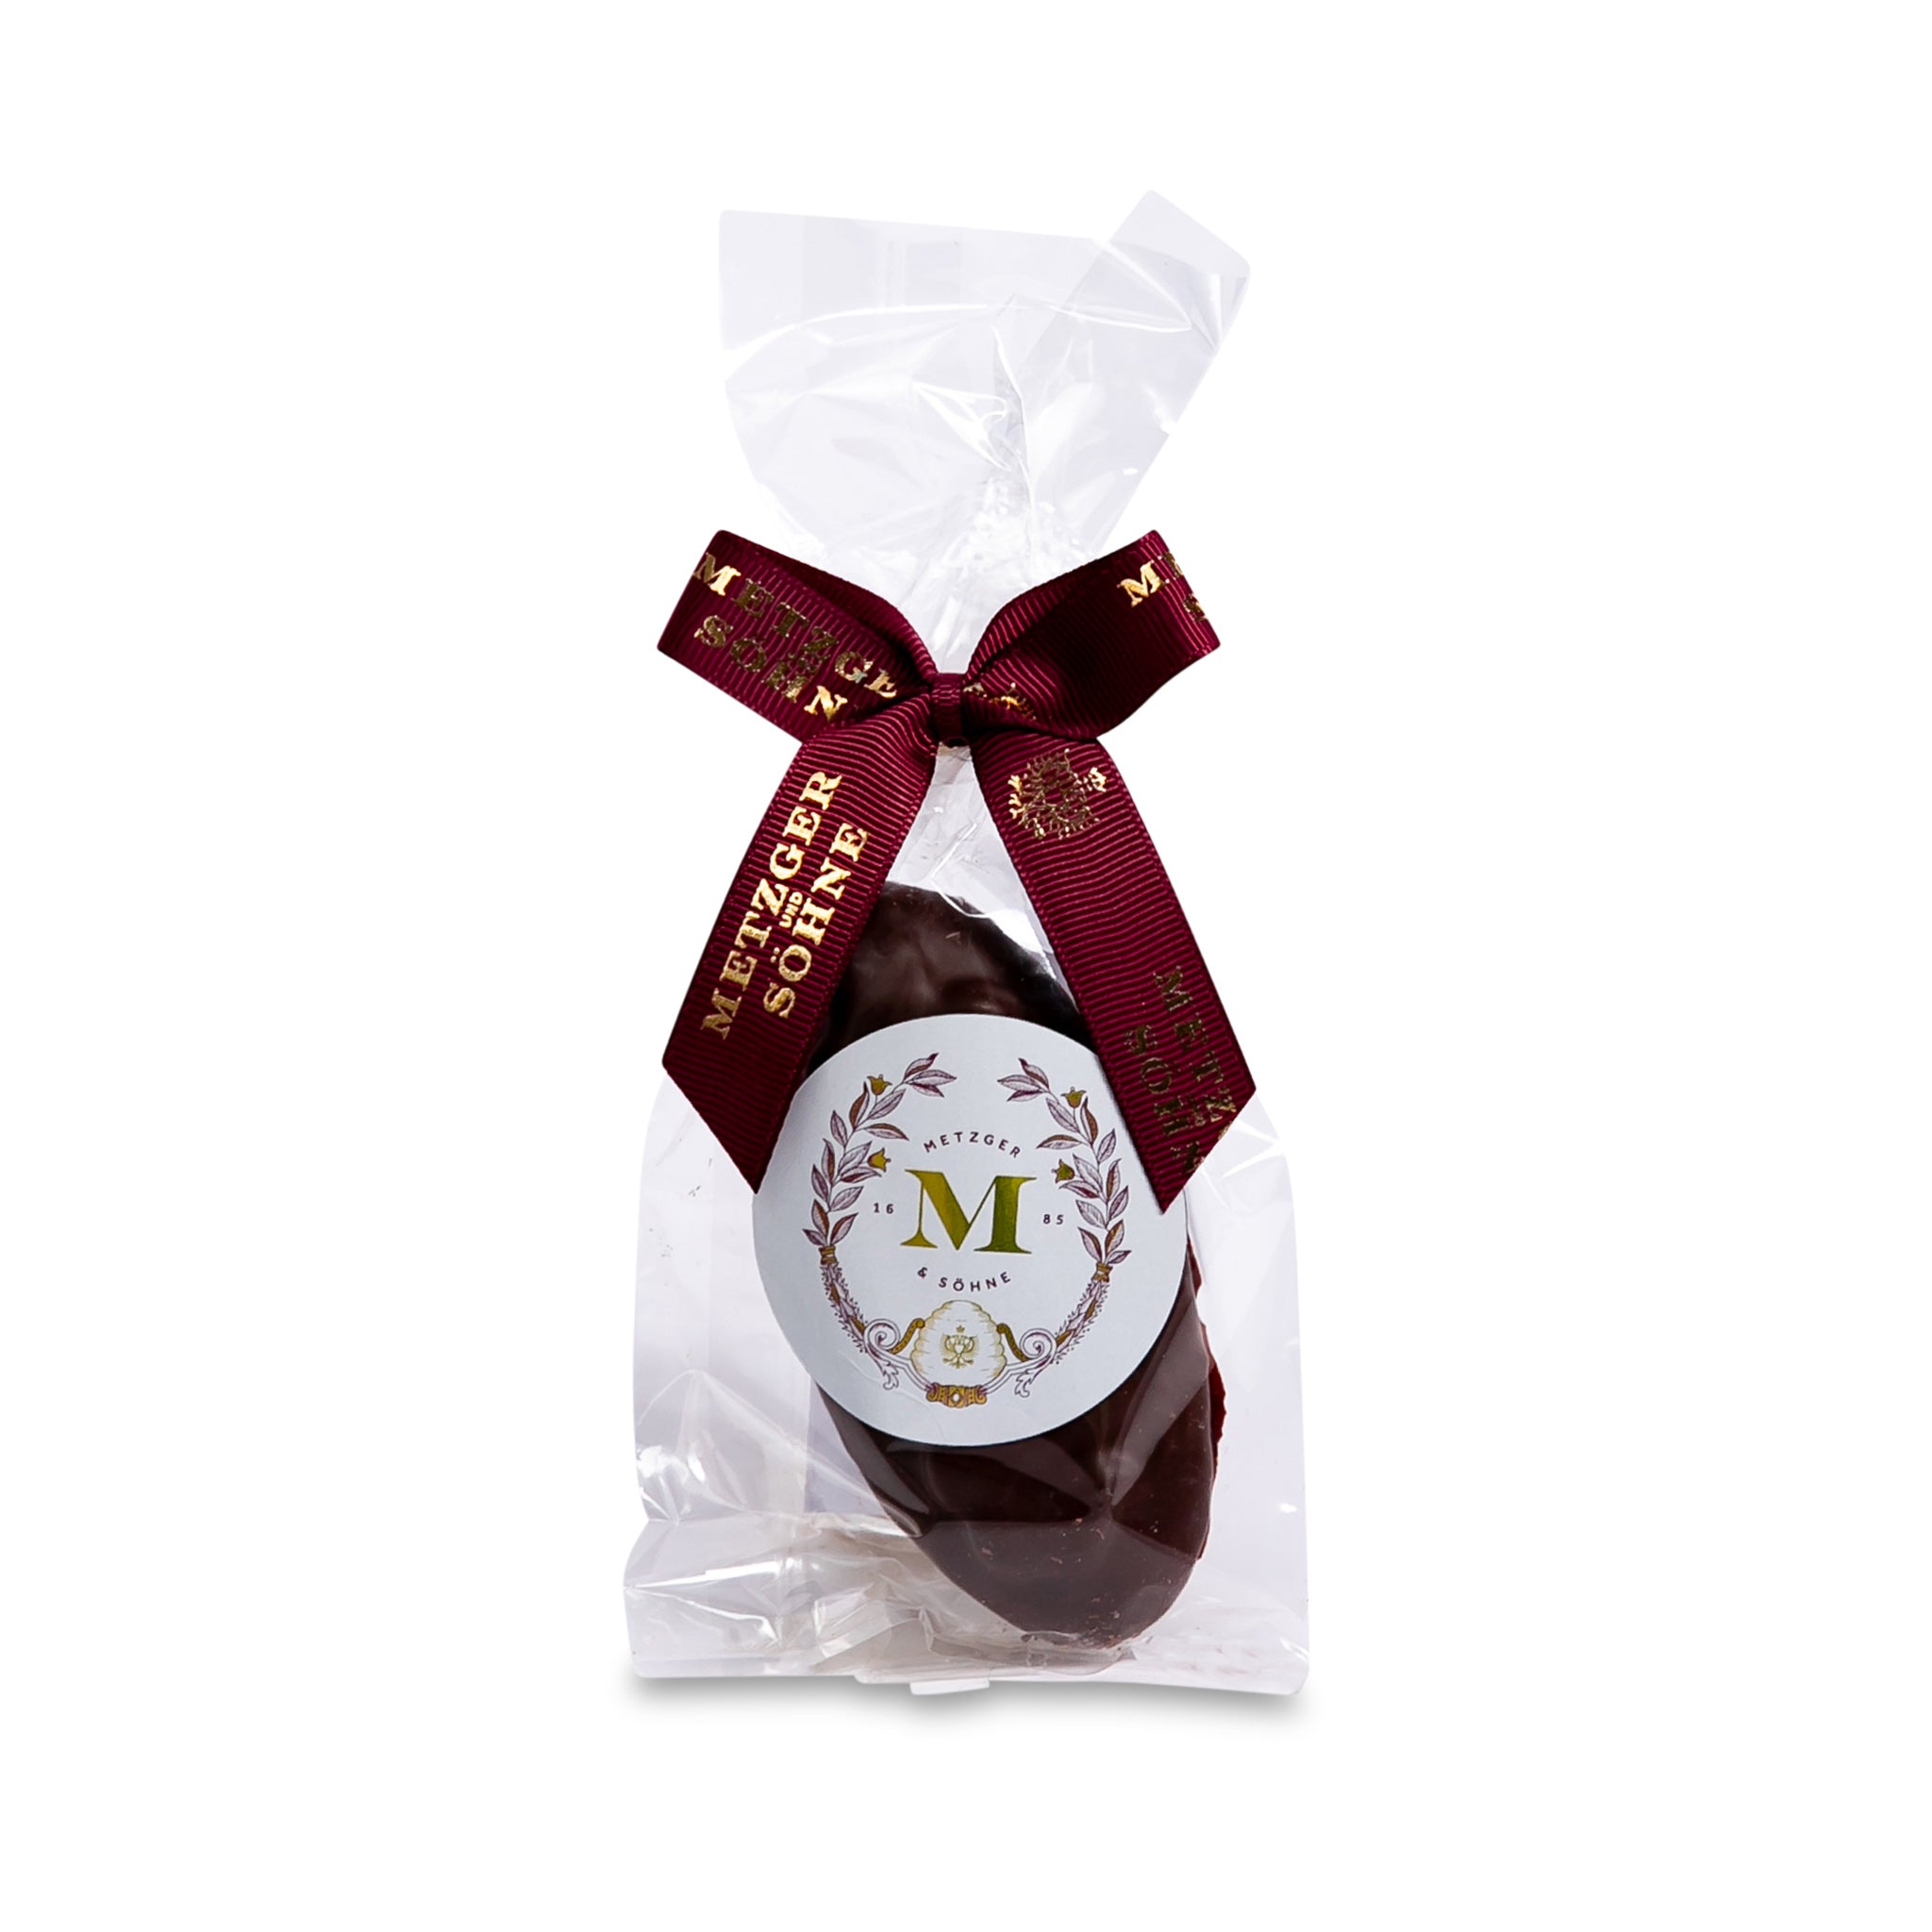 Delectable Lebkuchen cookie with a layer of raspberry jam, encased in high quality dark chocolate. The high quality chocolate couvertures enchant with an intense chocolate taste, perfectly complimenting our Lebkuchen and raspberry jam. A charming and tasty stocking filler!